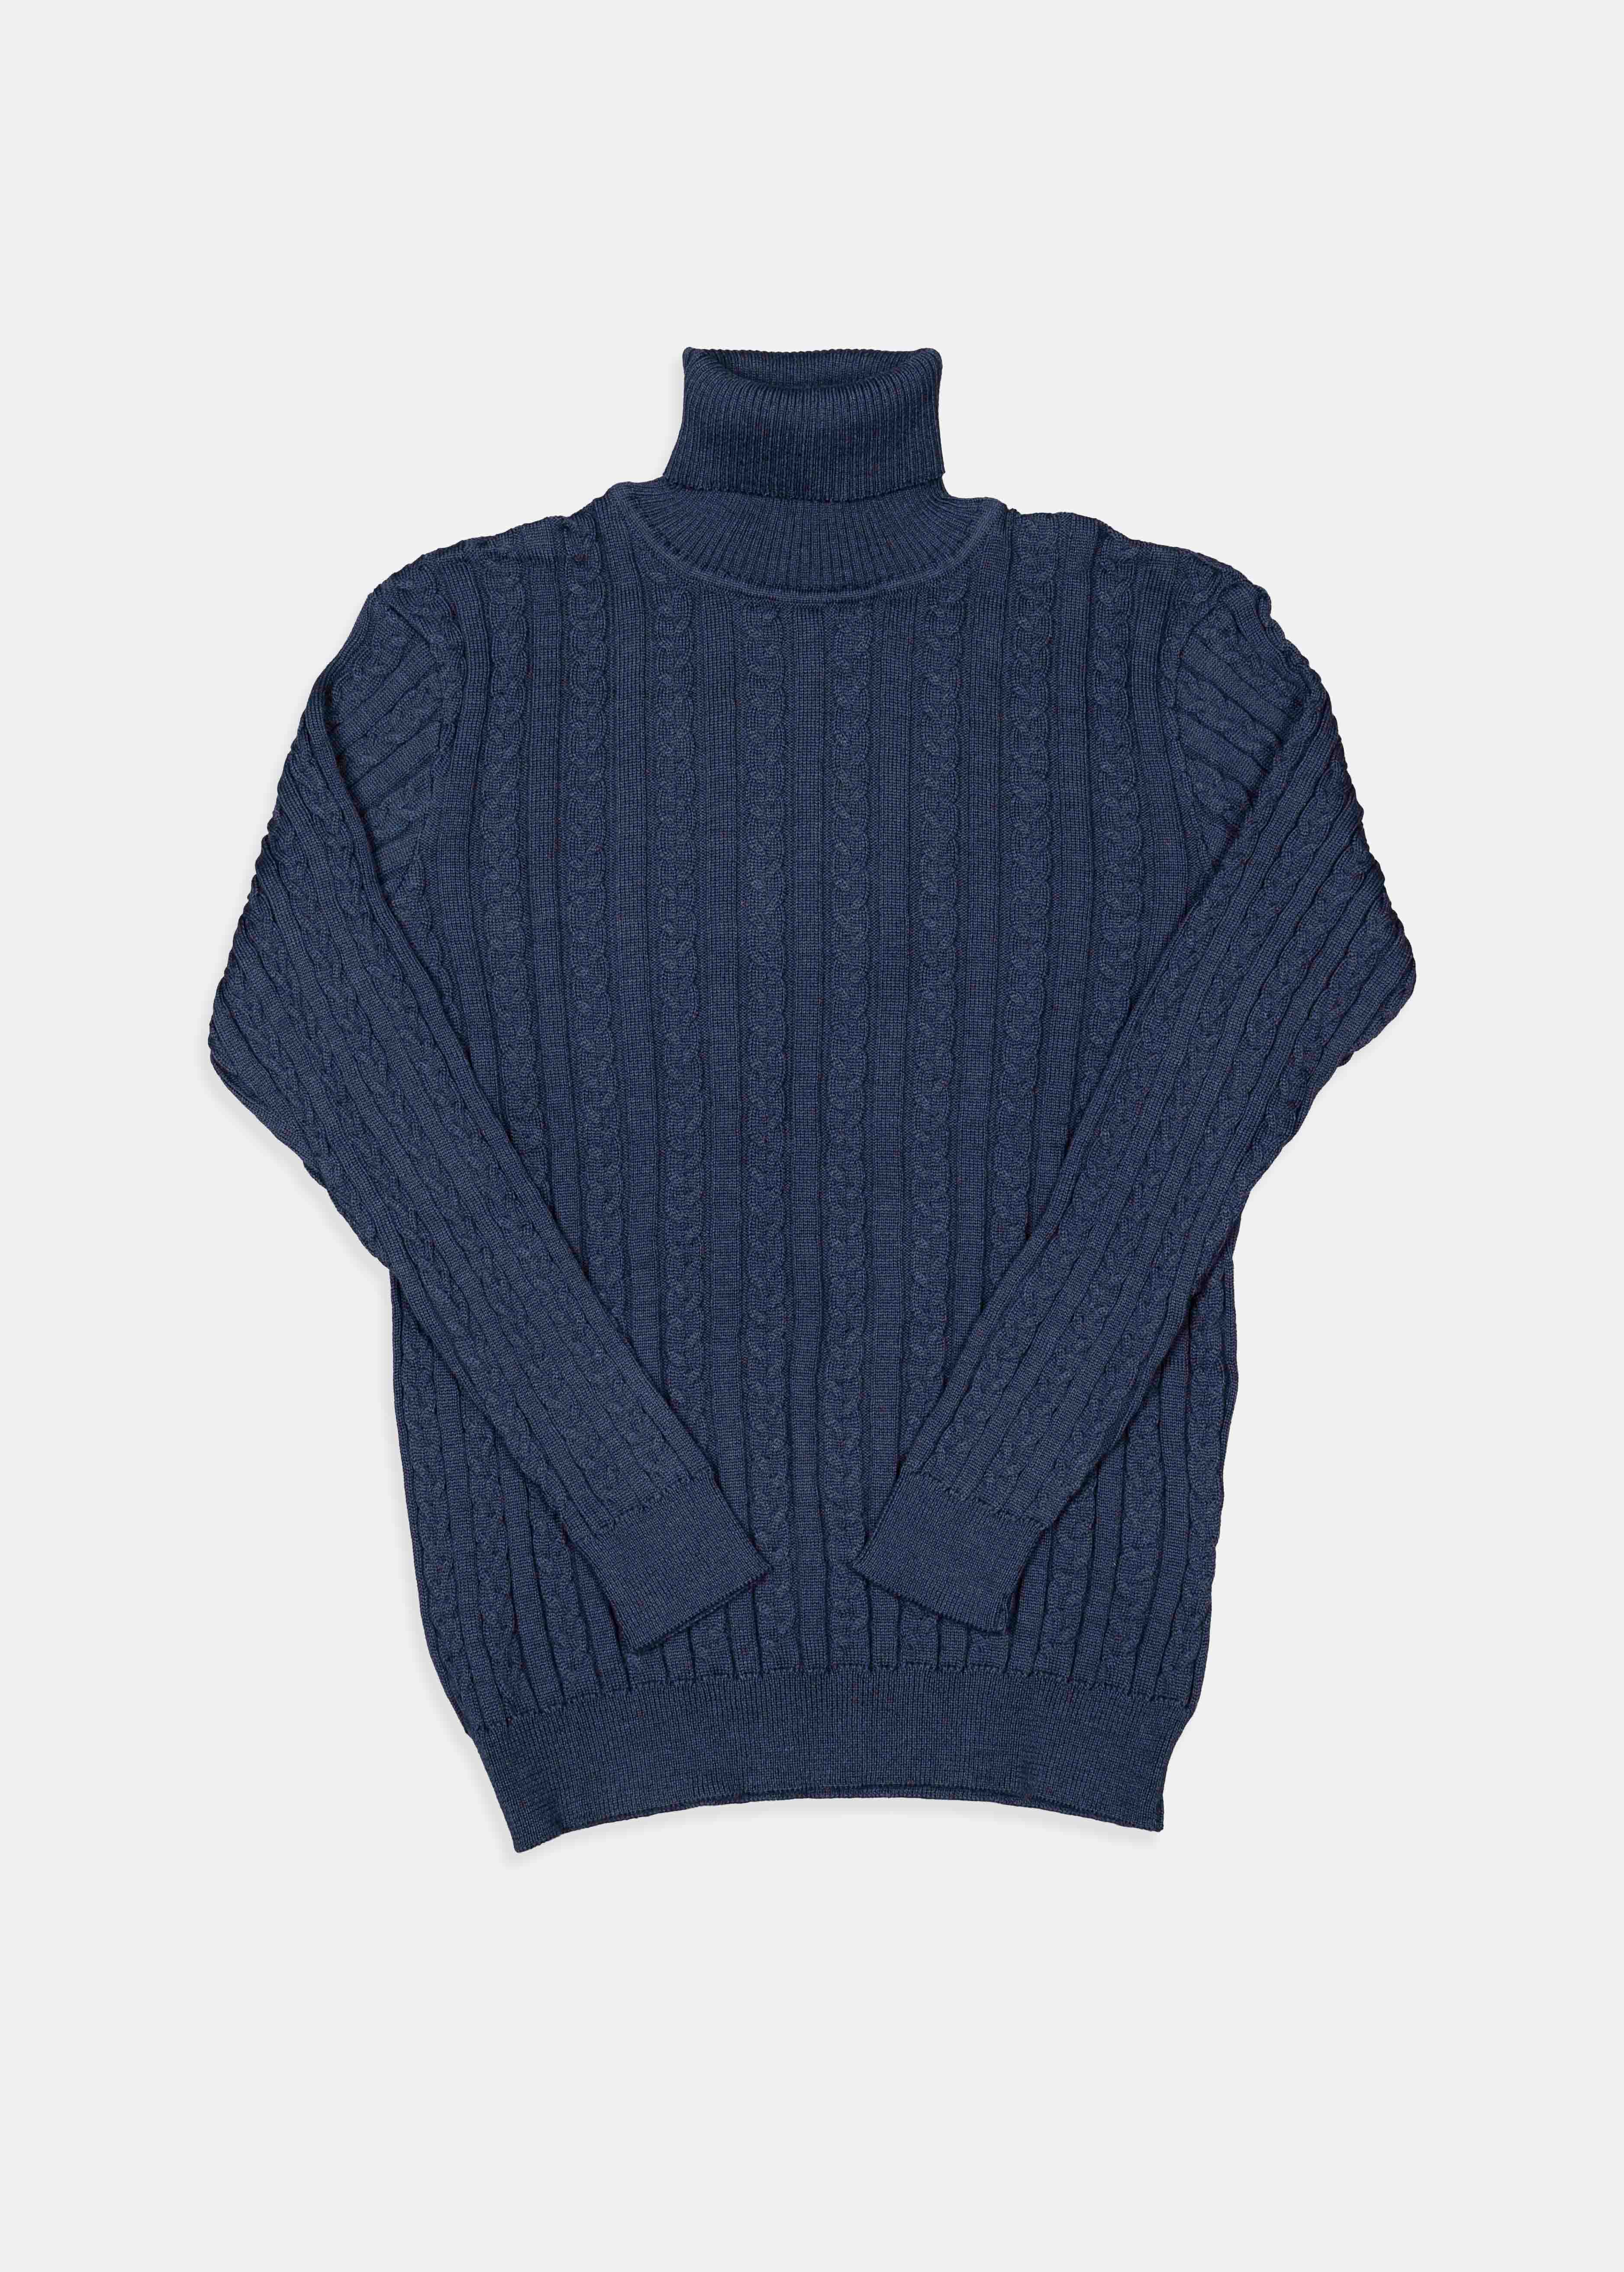 Navy Cable Roll Neck Knit